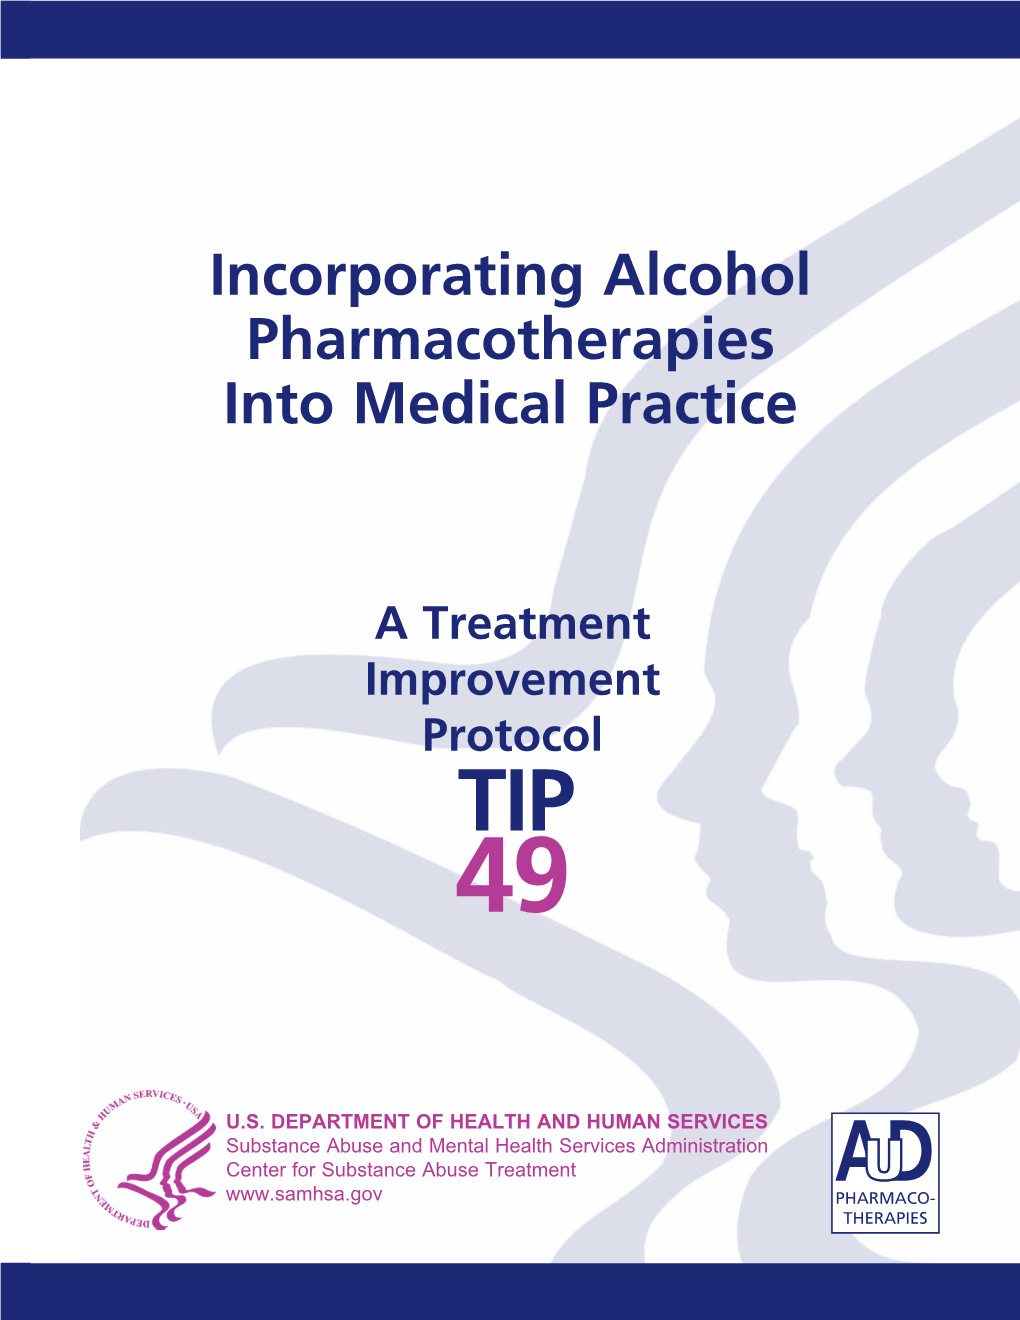 TIP 49 Incorporating Alcohol Pharmacotherapies Into Medical